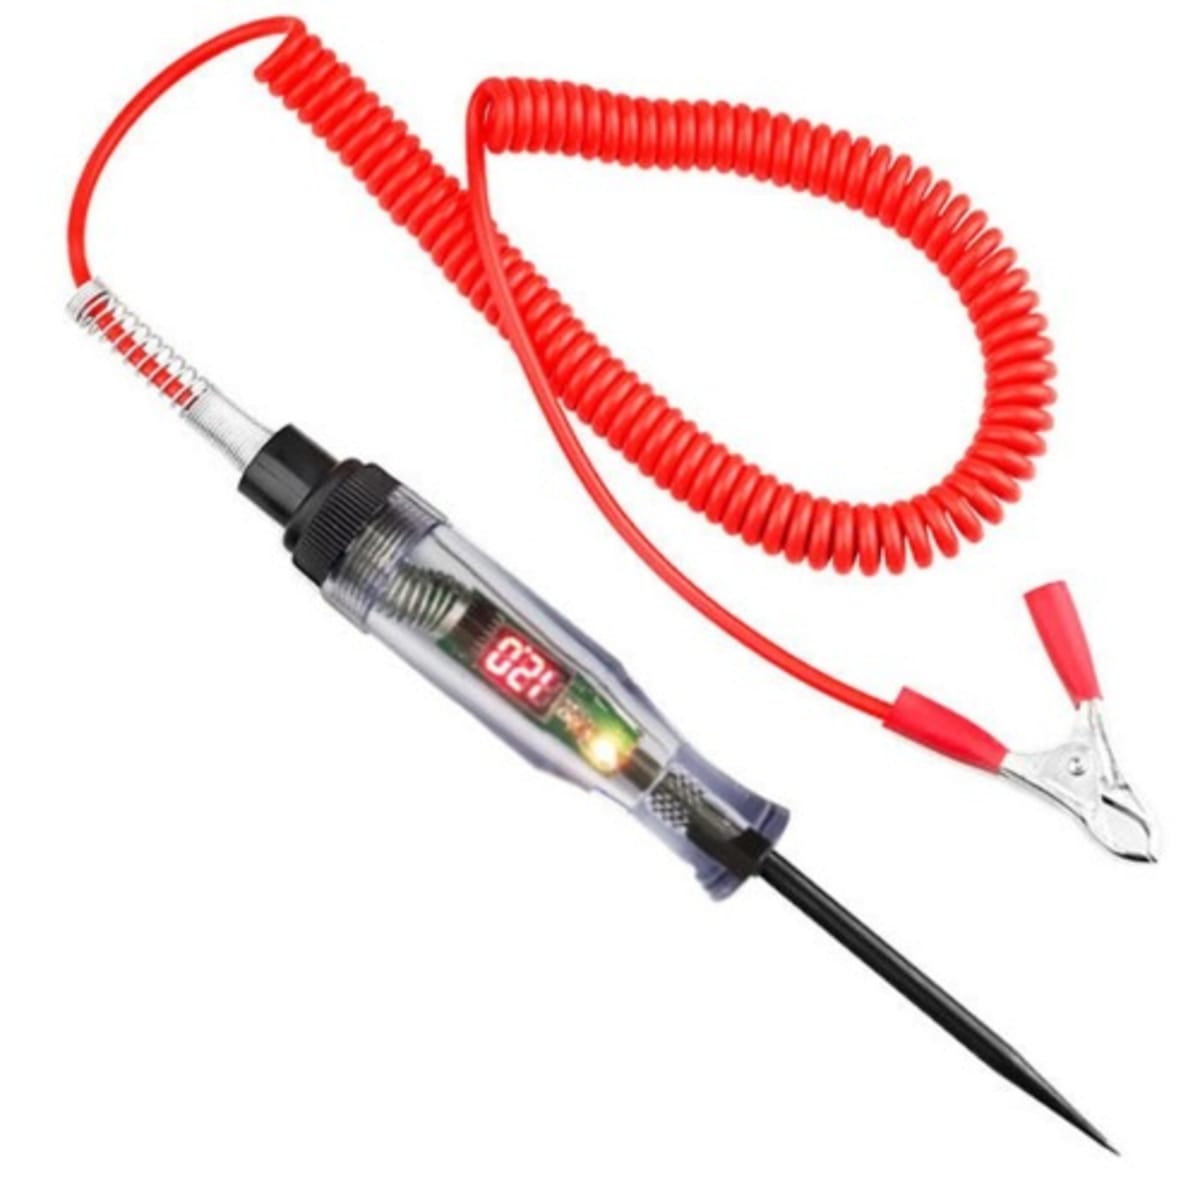 Auto Circuit Tester With Led Indication, Electric Test Pen For 6v